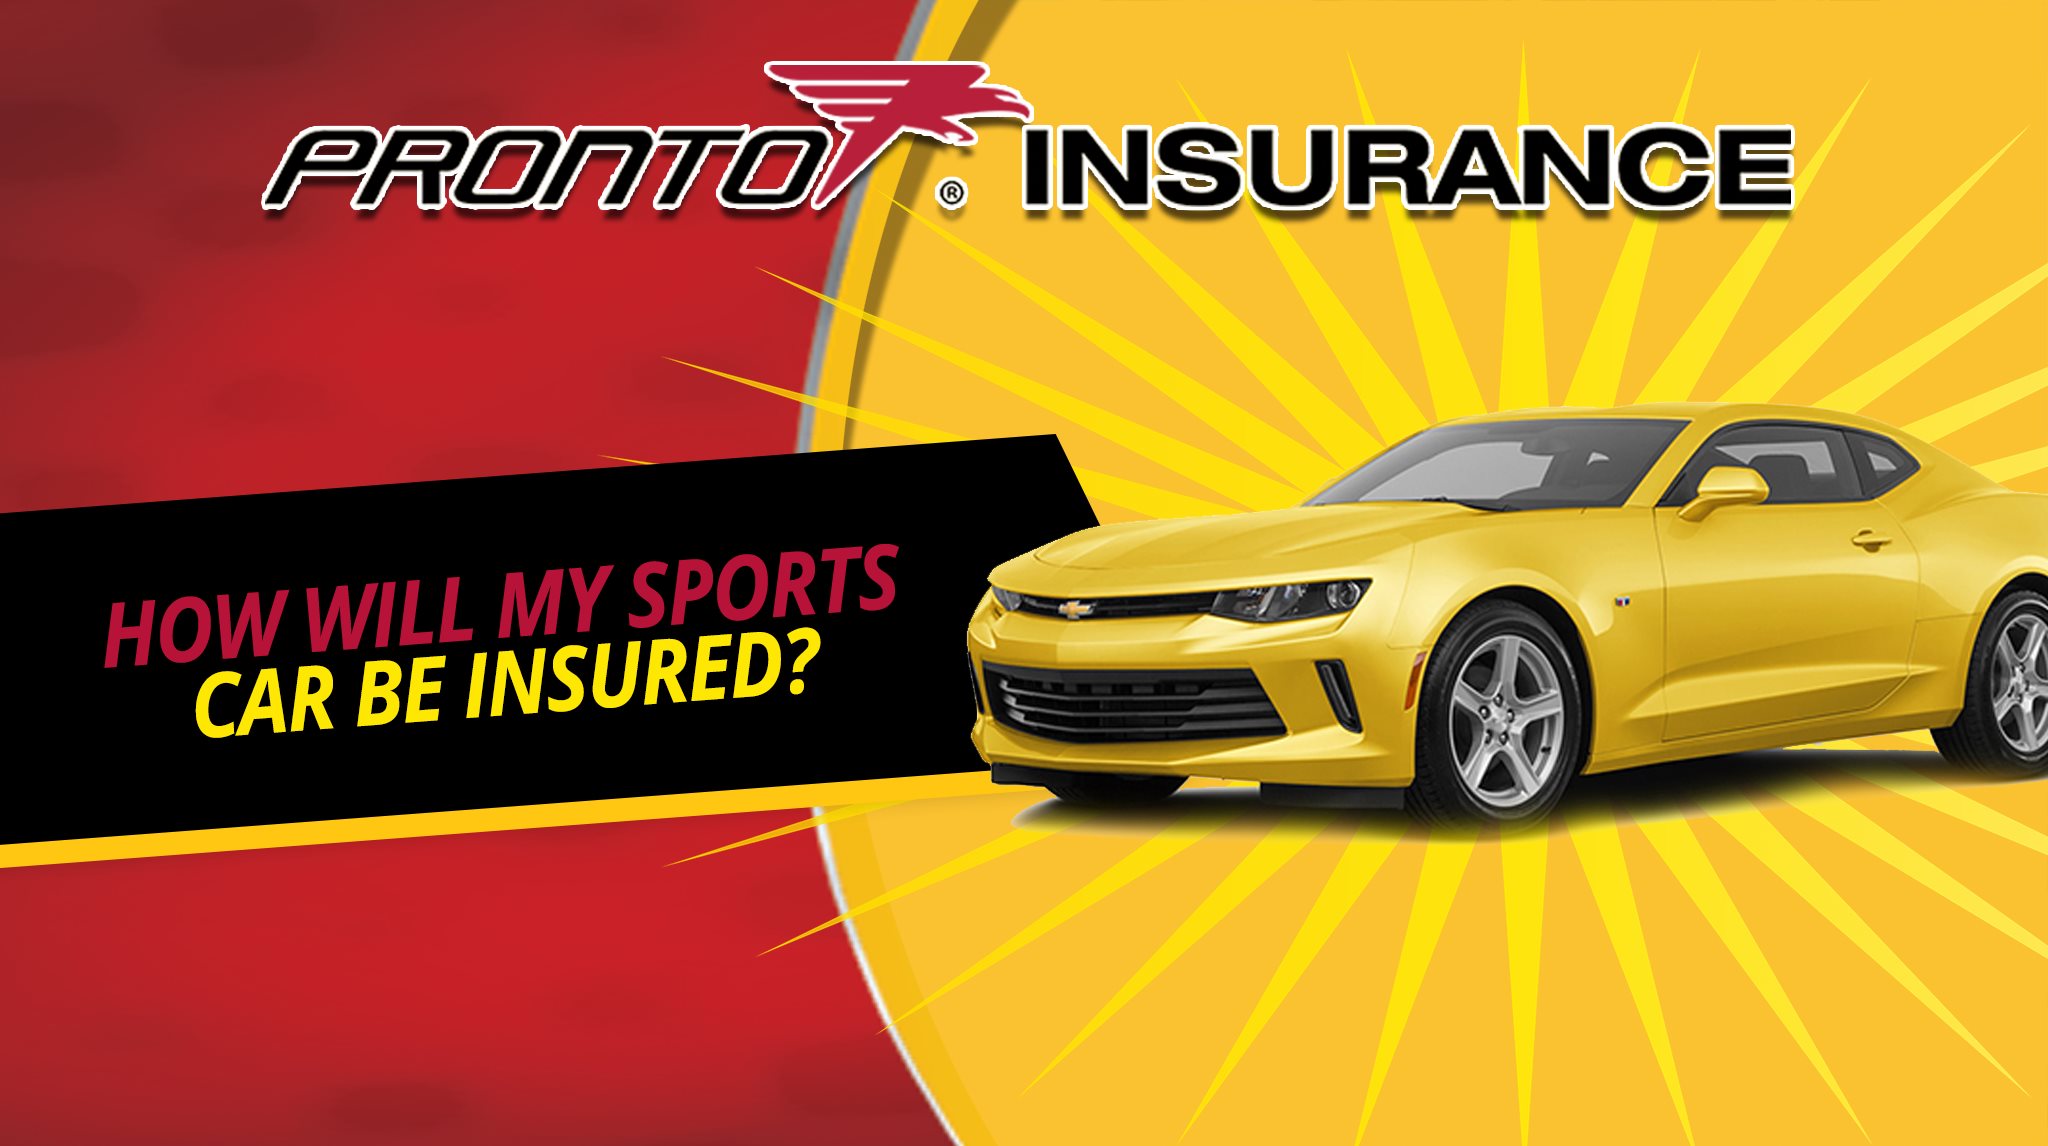 How Will My Sports Car be Insured?